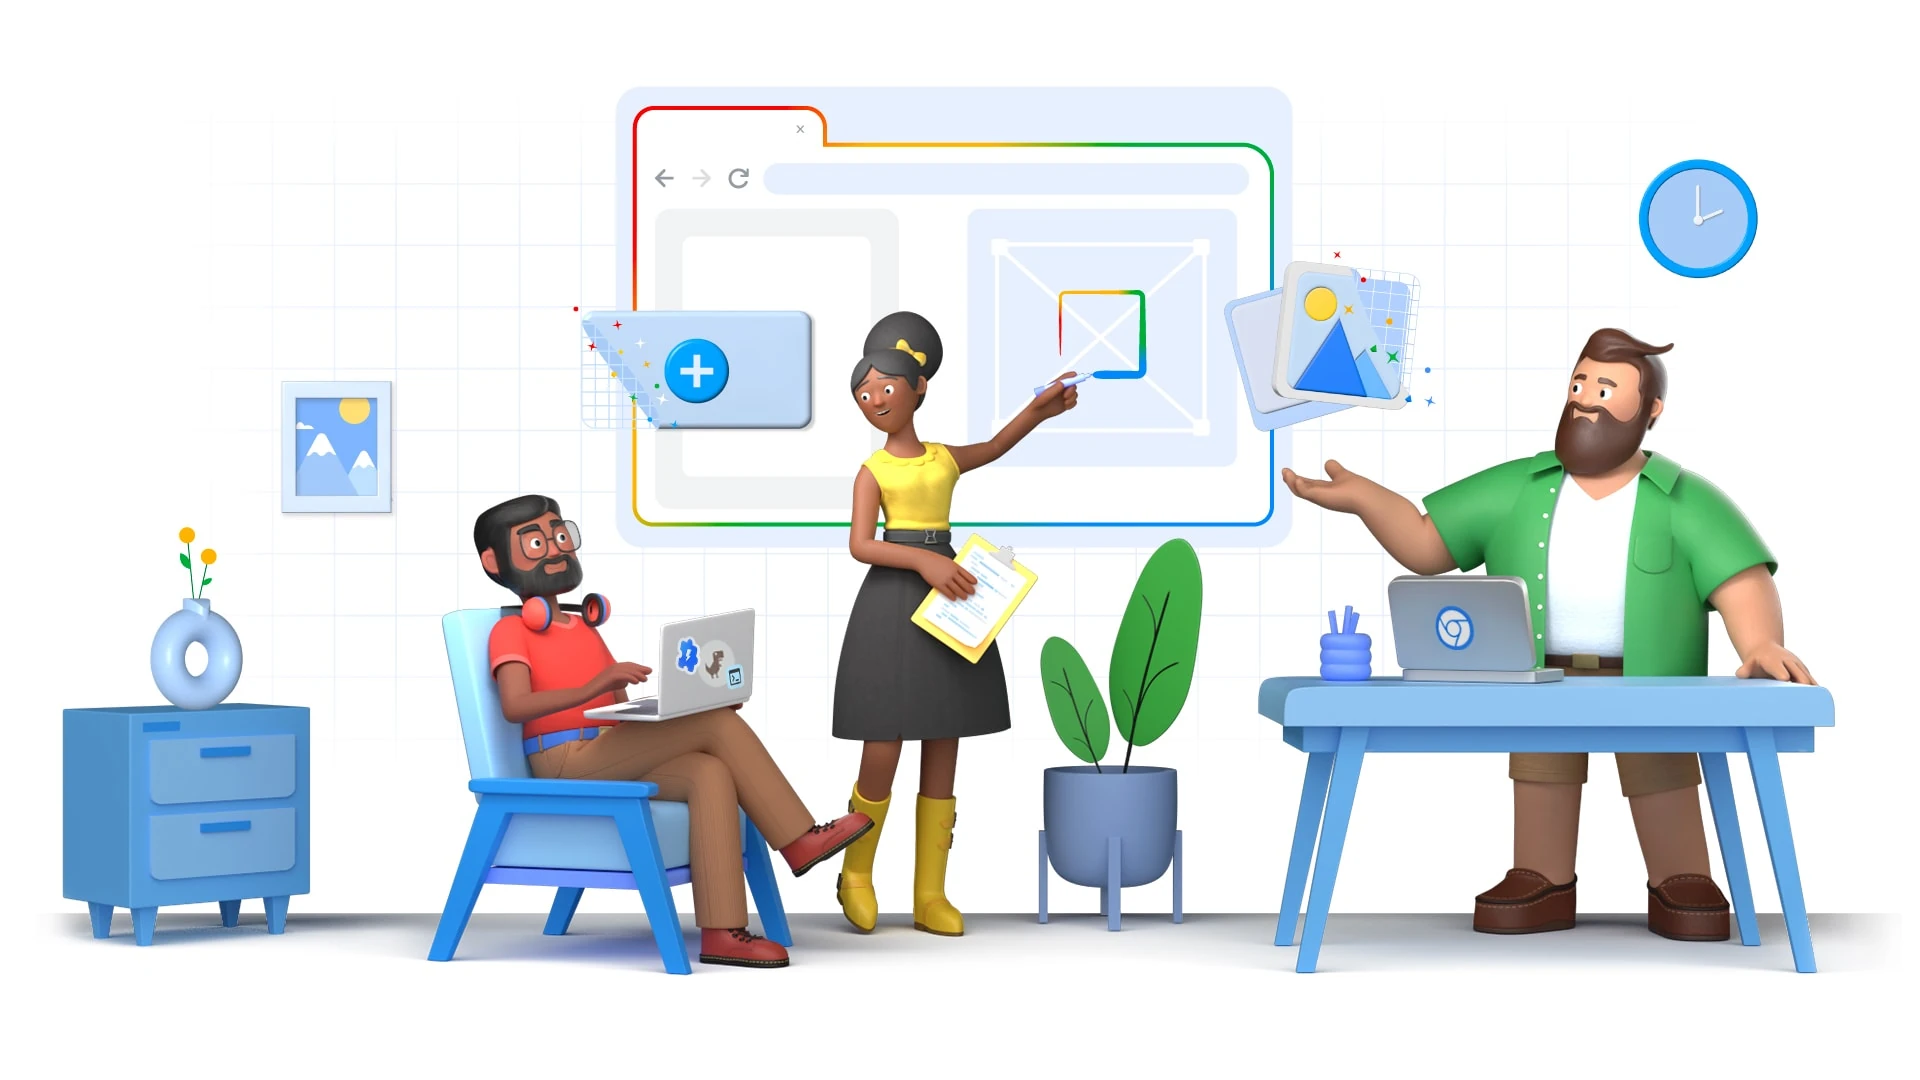 A cartoon-style rendering of a diverse set of people building a website on a whiteboard